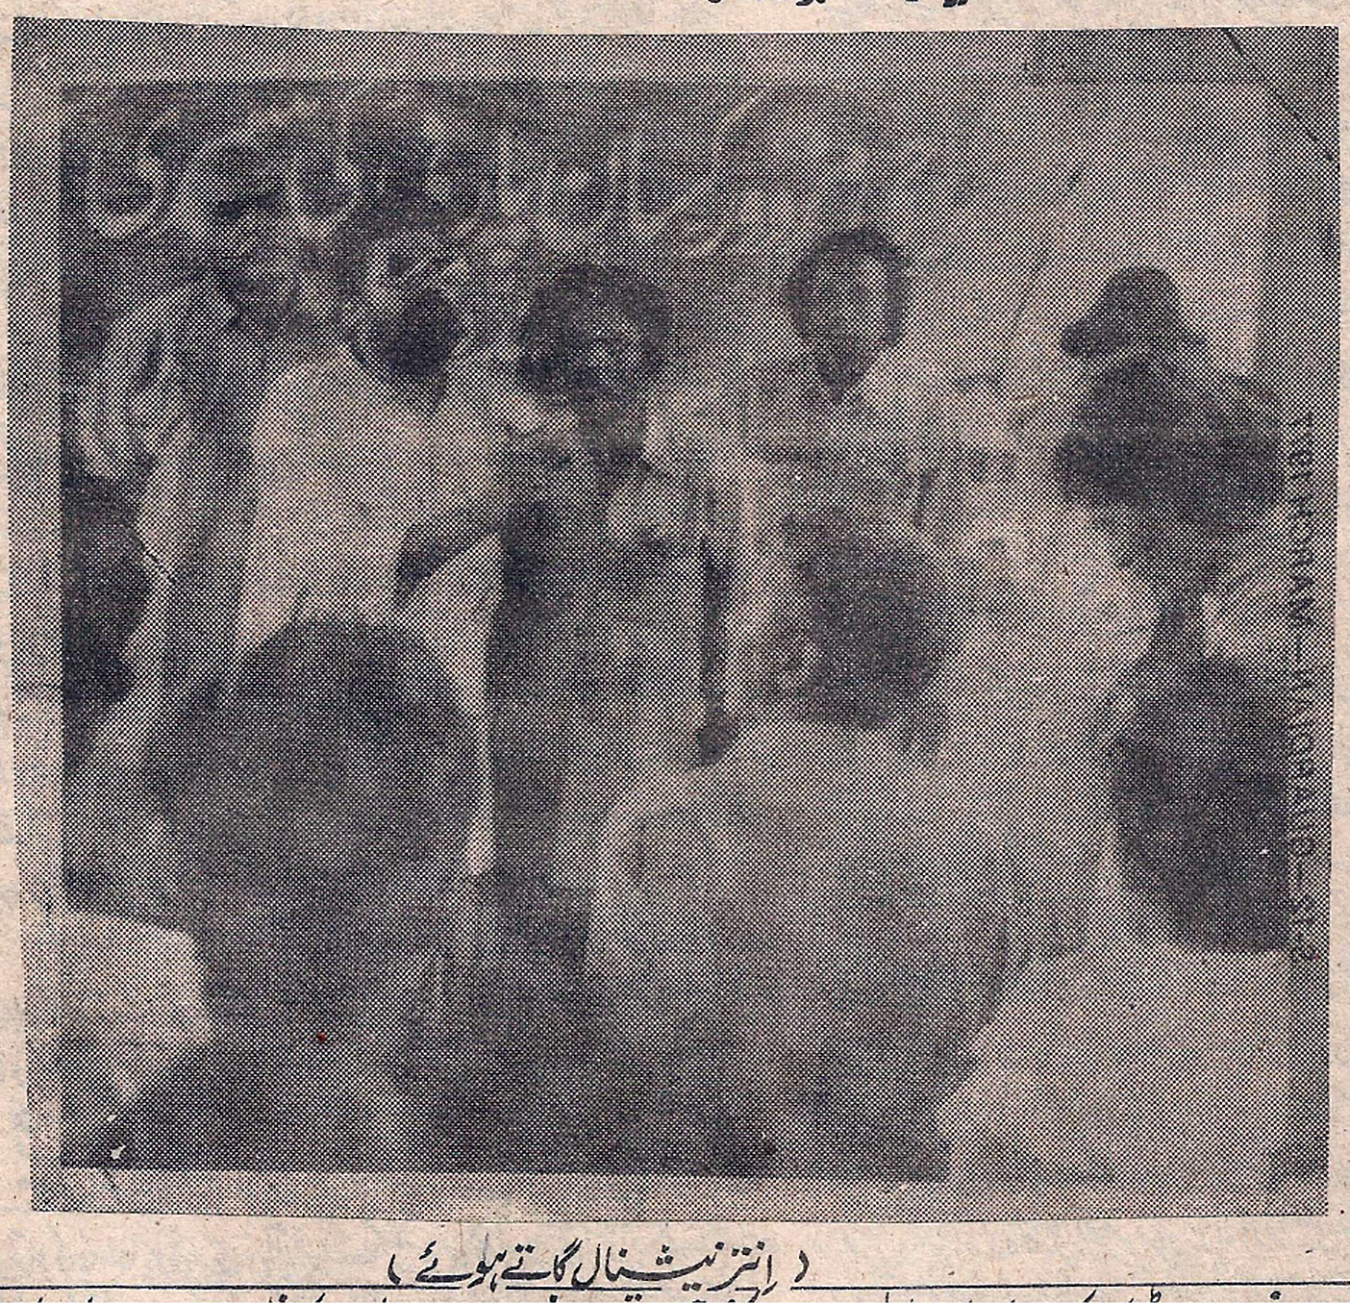 “Singing the Internationale.” MKP members sing the Internationale at a party congress in Karachi in 1977. The MKP president Major Ishaq Muhammad can be seen standing at the far left. Clipping from the MKP’s Circular, no. 86 (November 1977). Scanned by Noaman Ali.